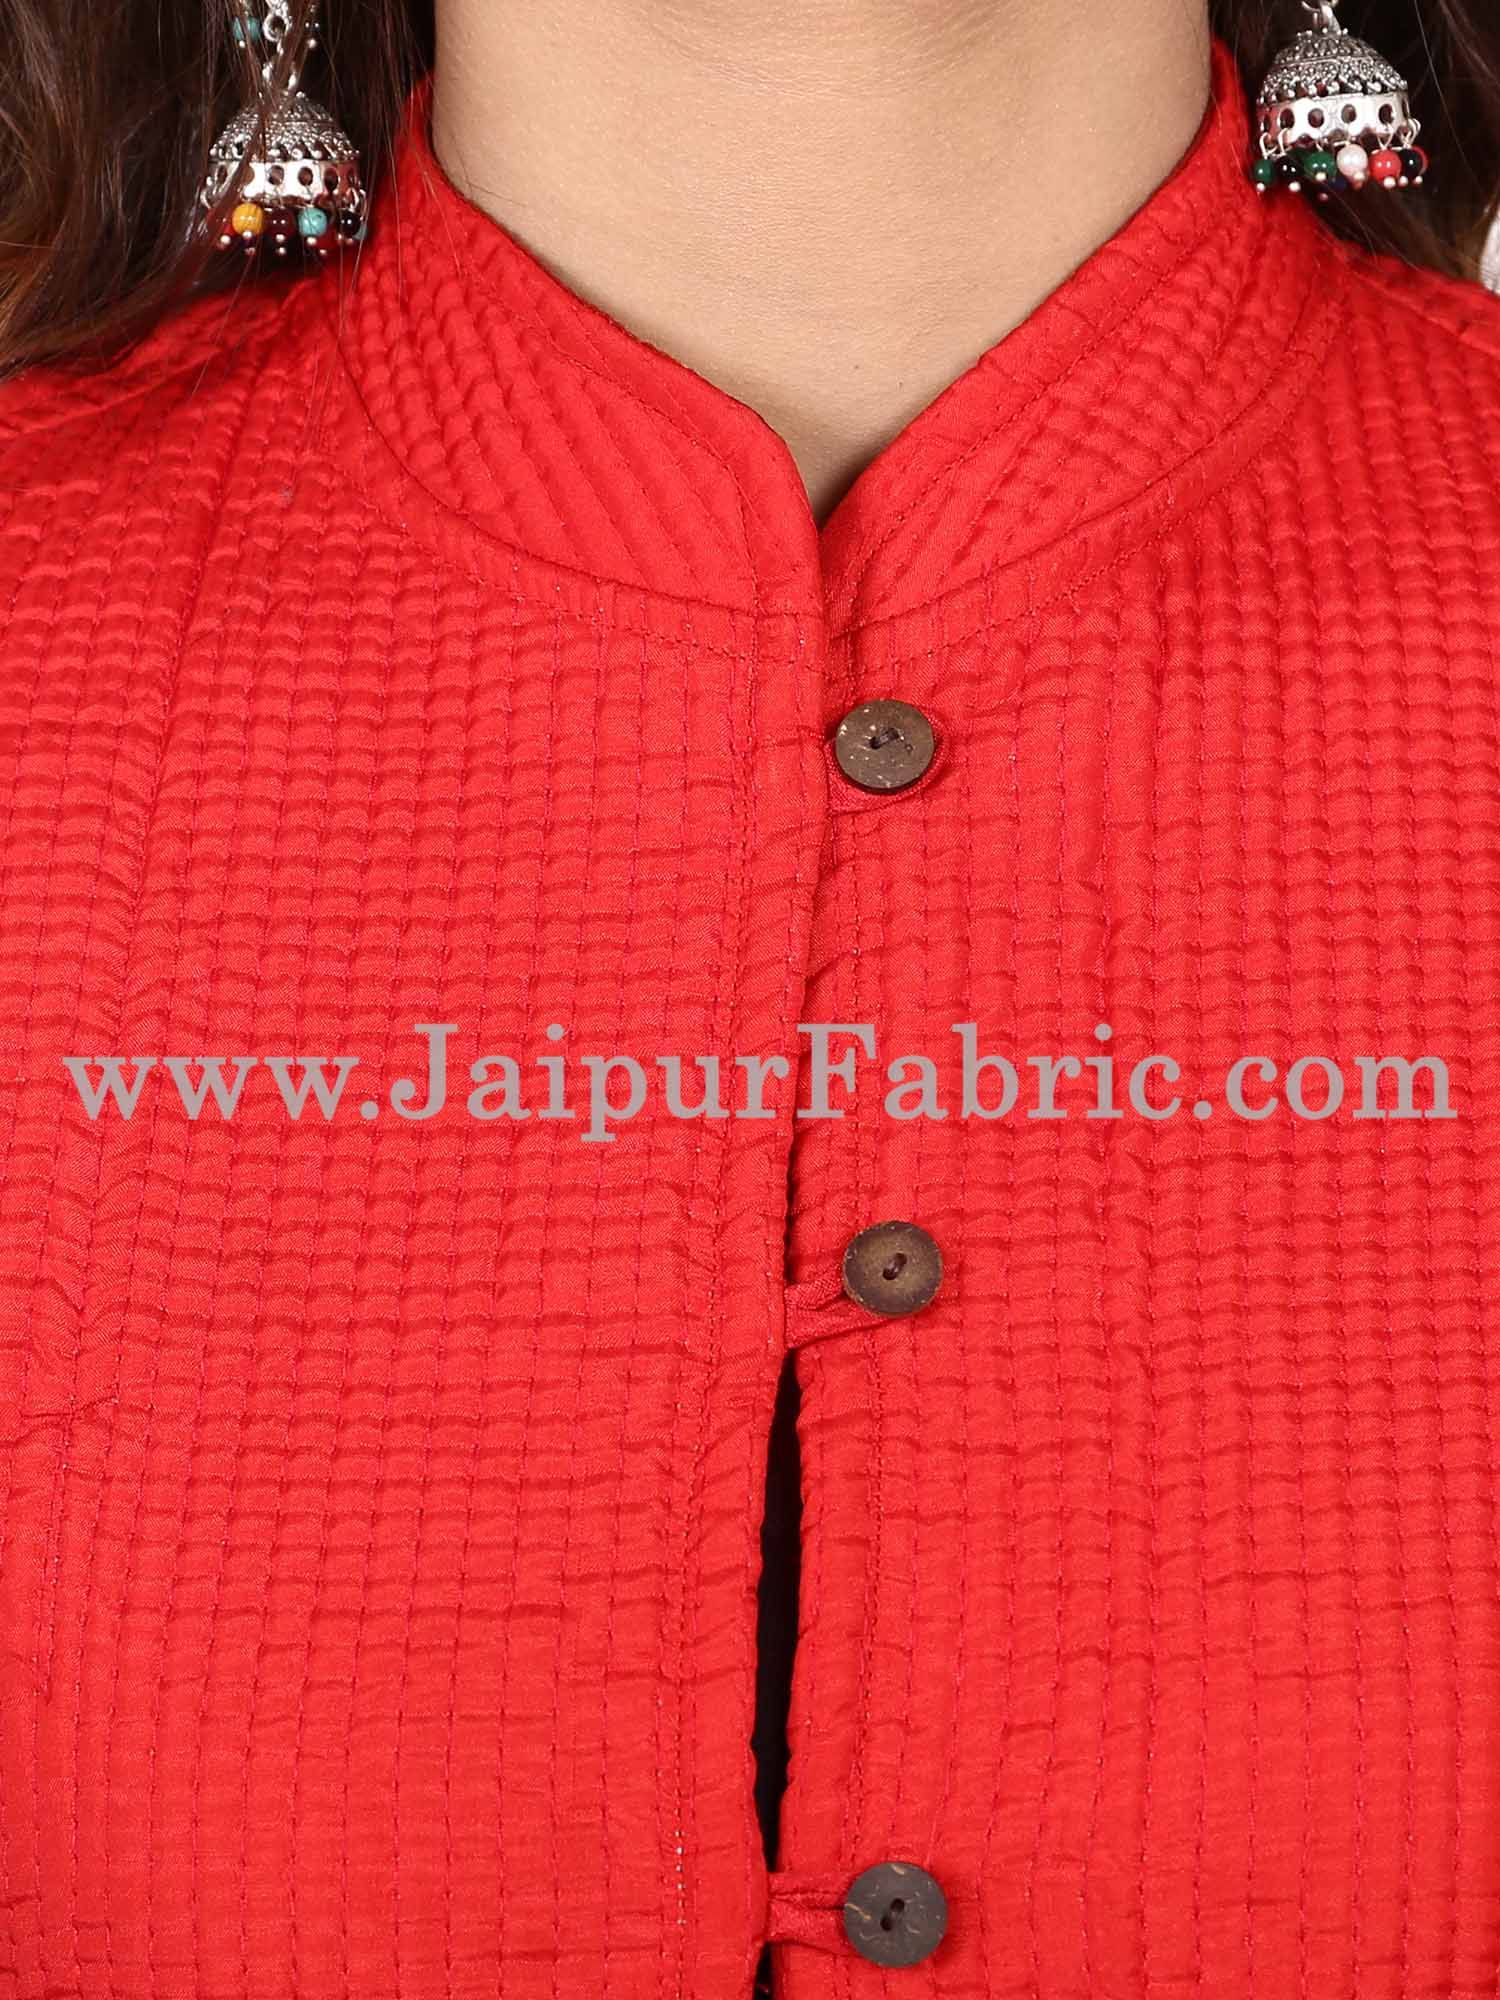 Women Solid Red Jacket